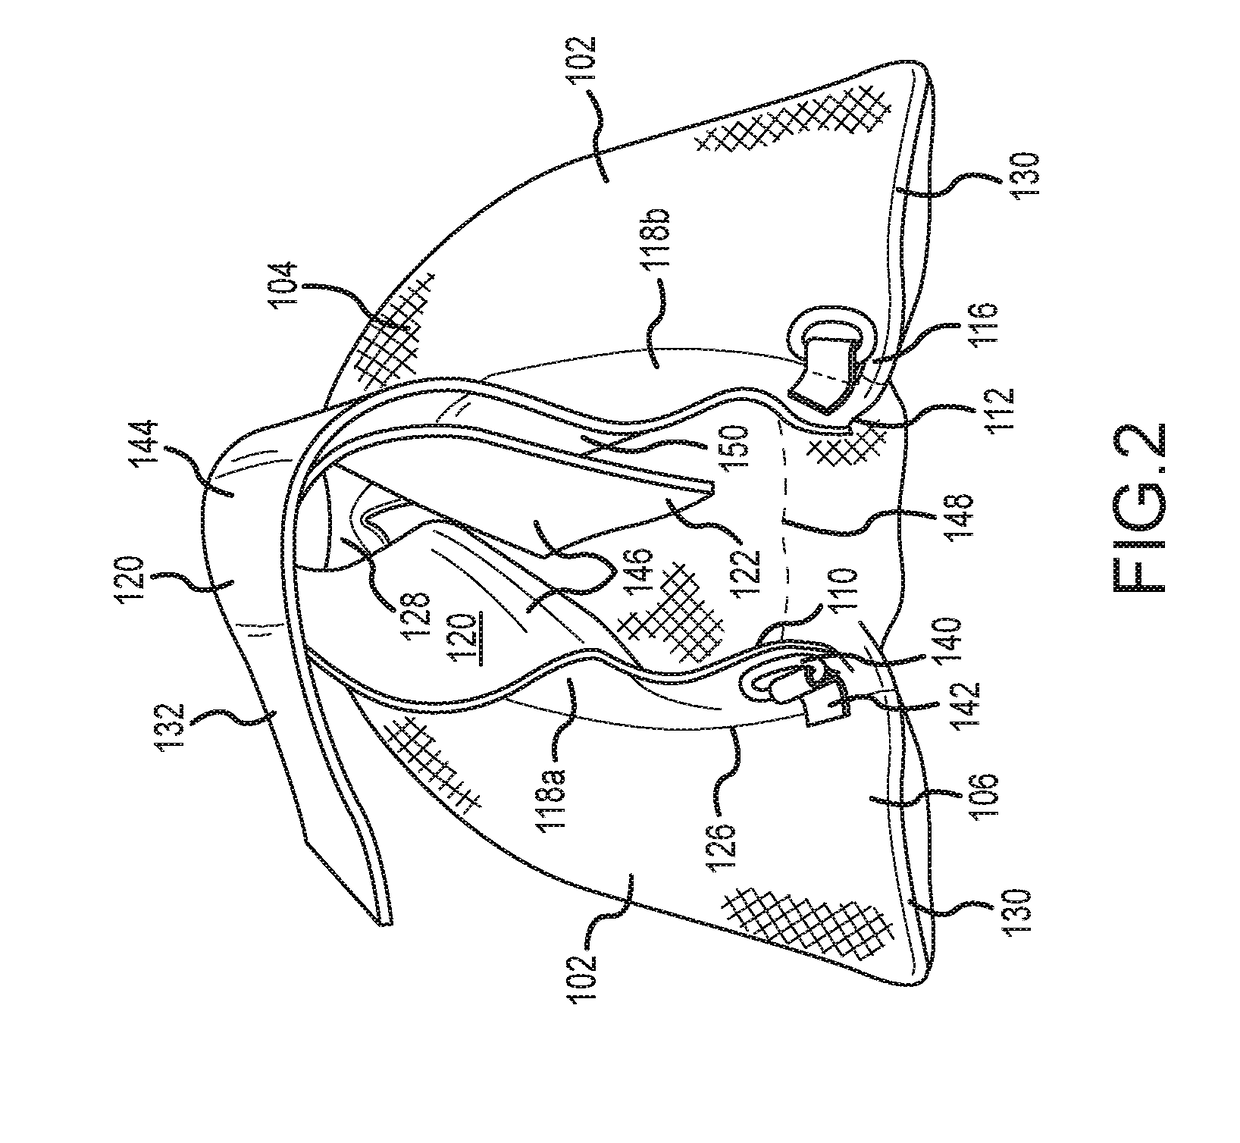 Head positioning aids with attachments for medical devices